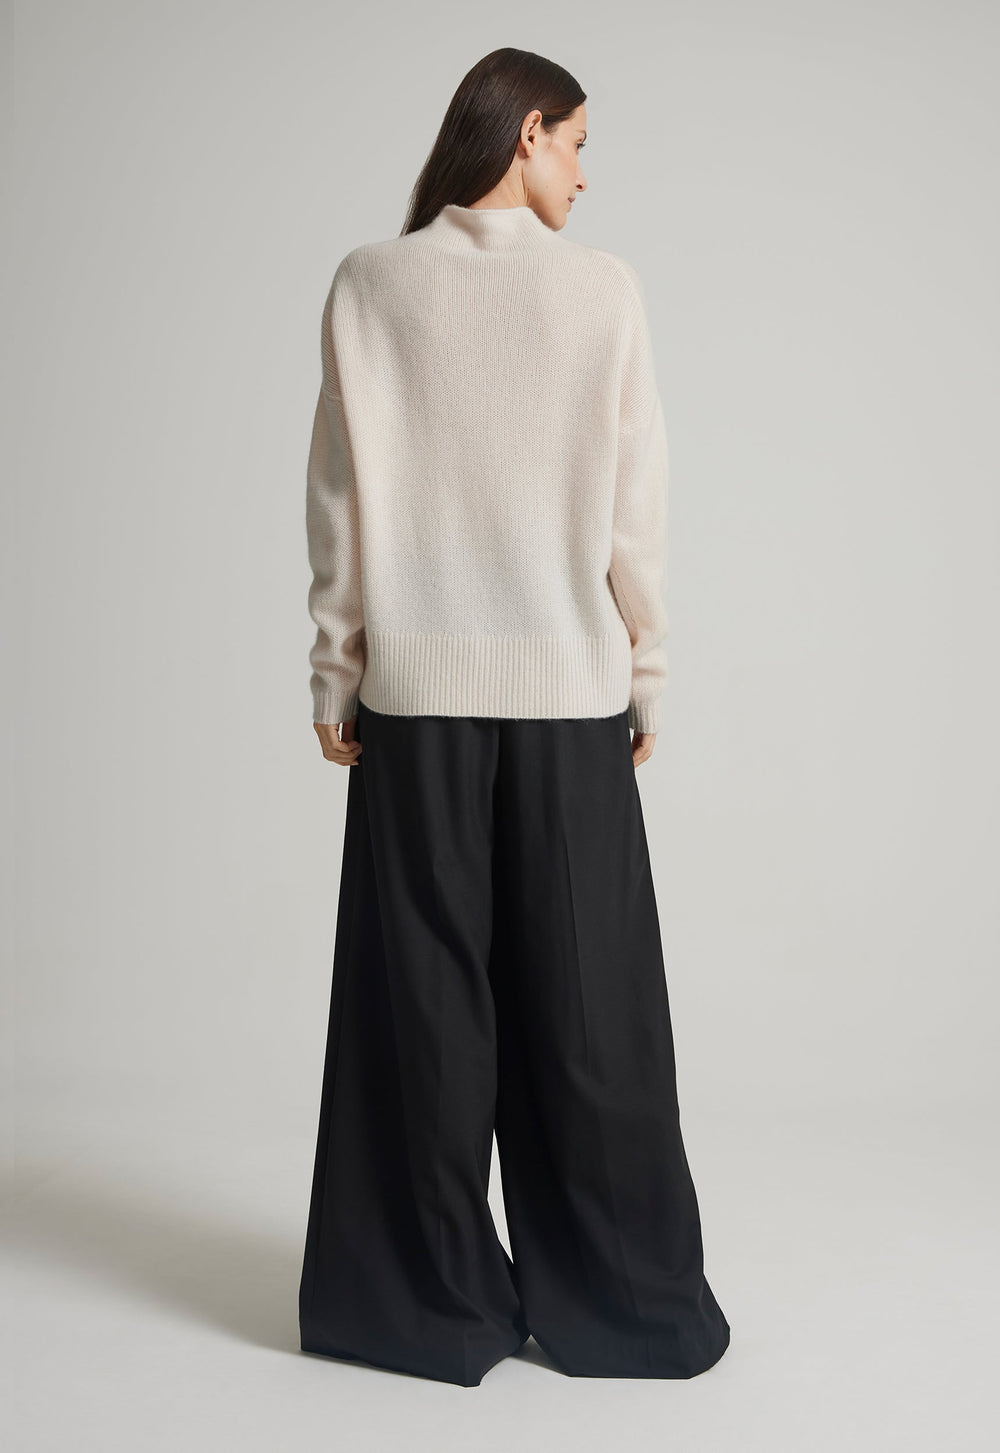 Jac+Jack GRAYSON CASHMERE SWEATER in Whisper